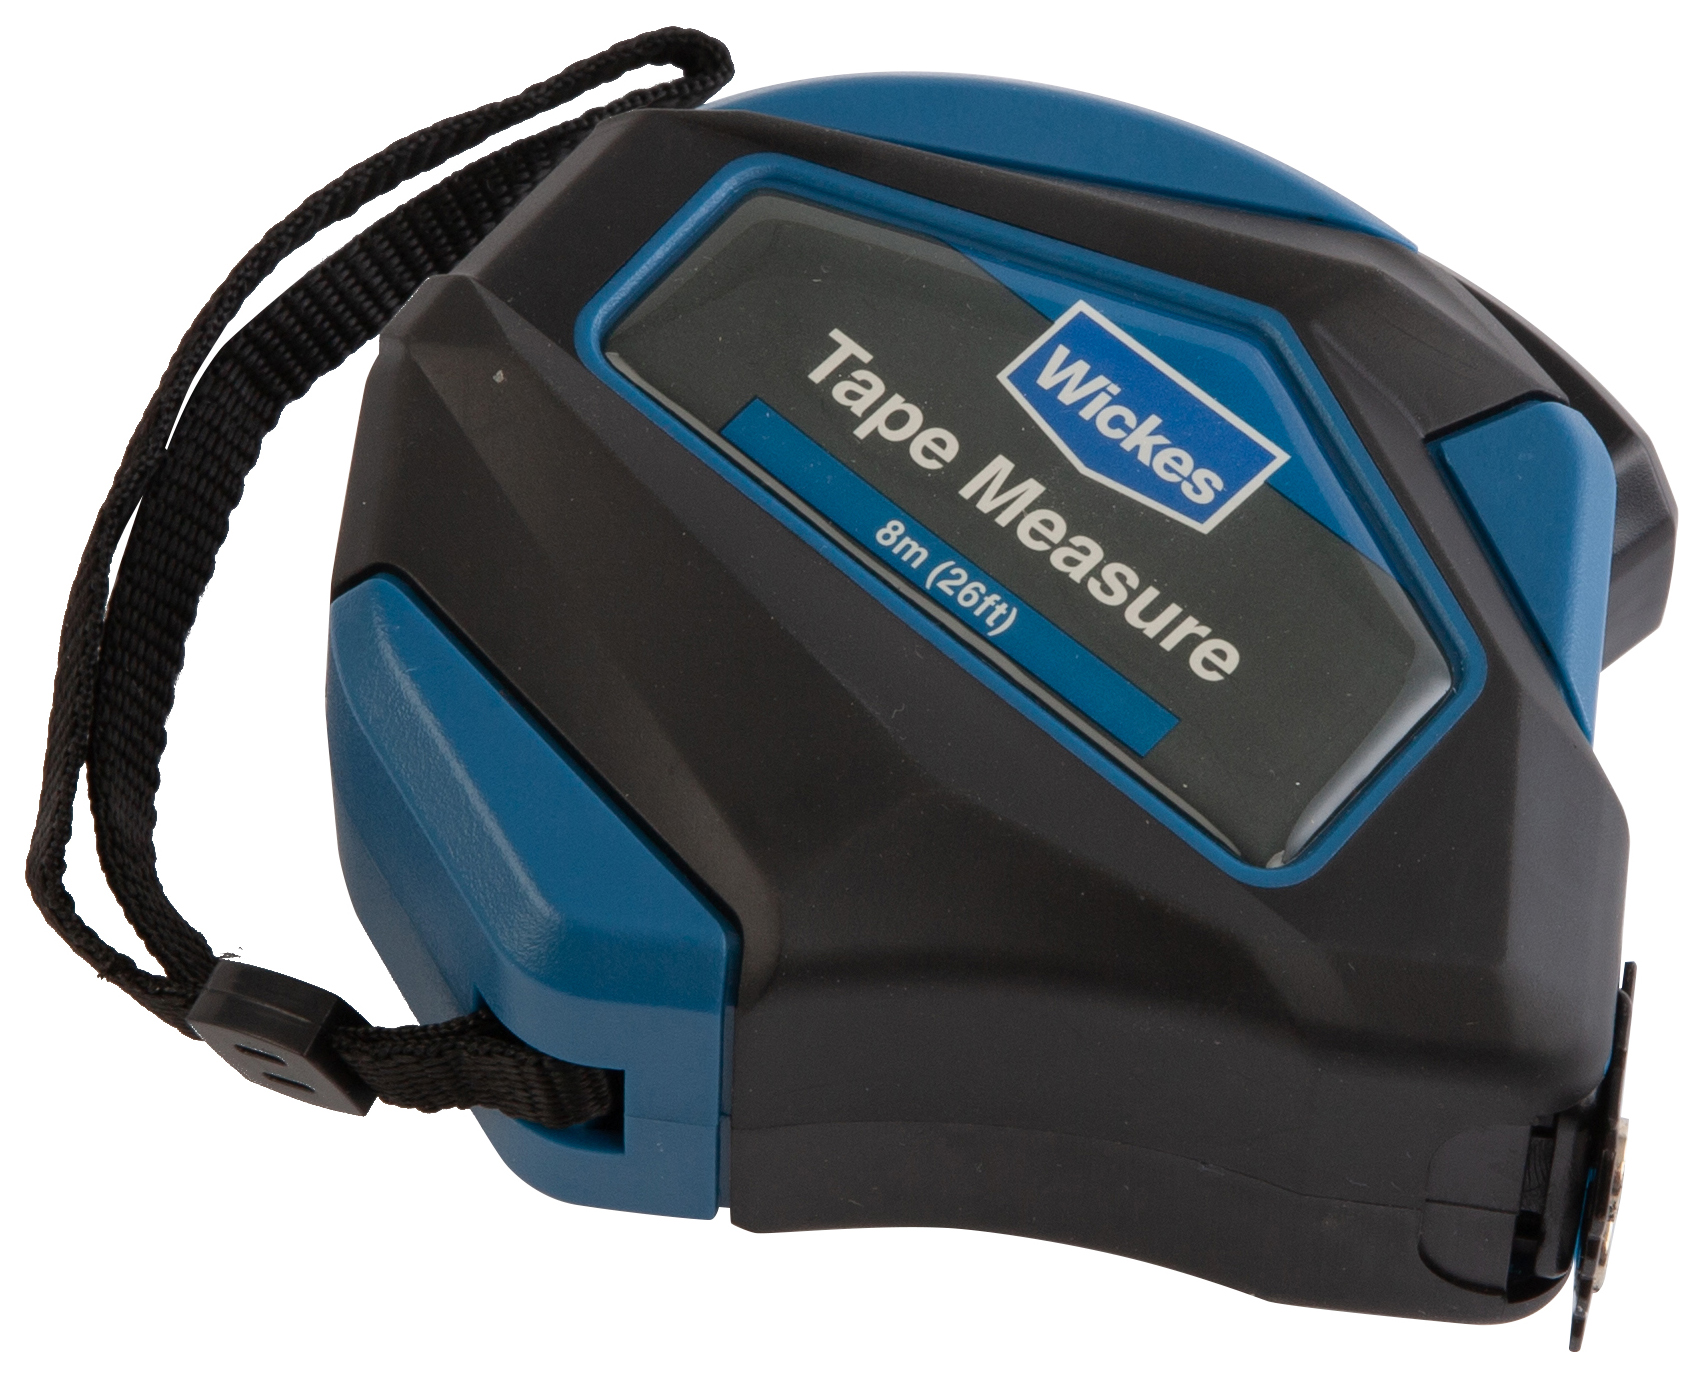 Image of Wickes Rugged Tape Measure - 8m / 26ft